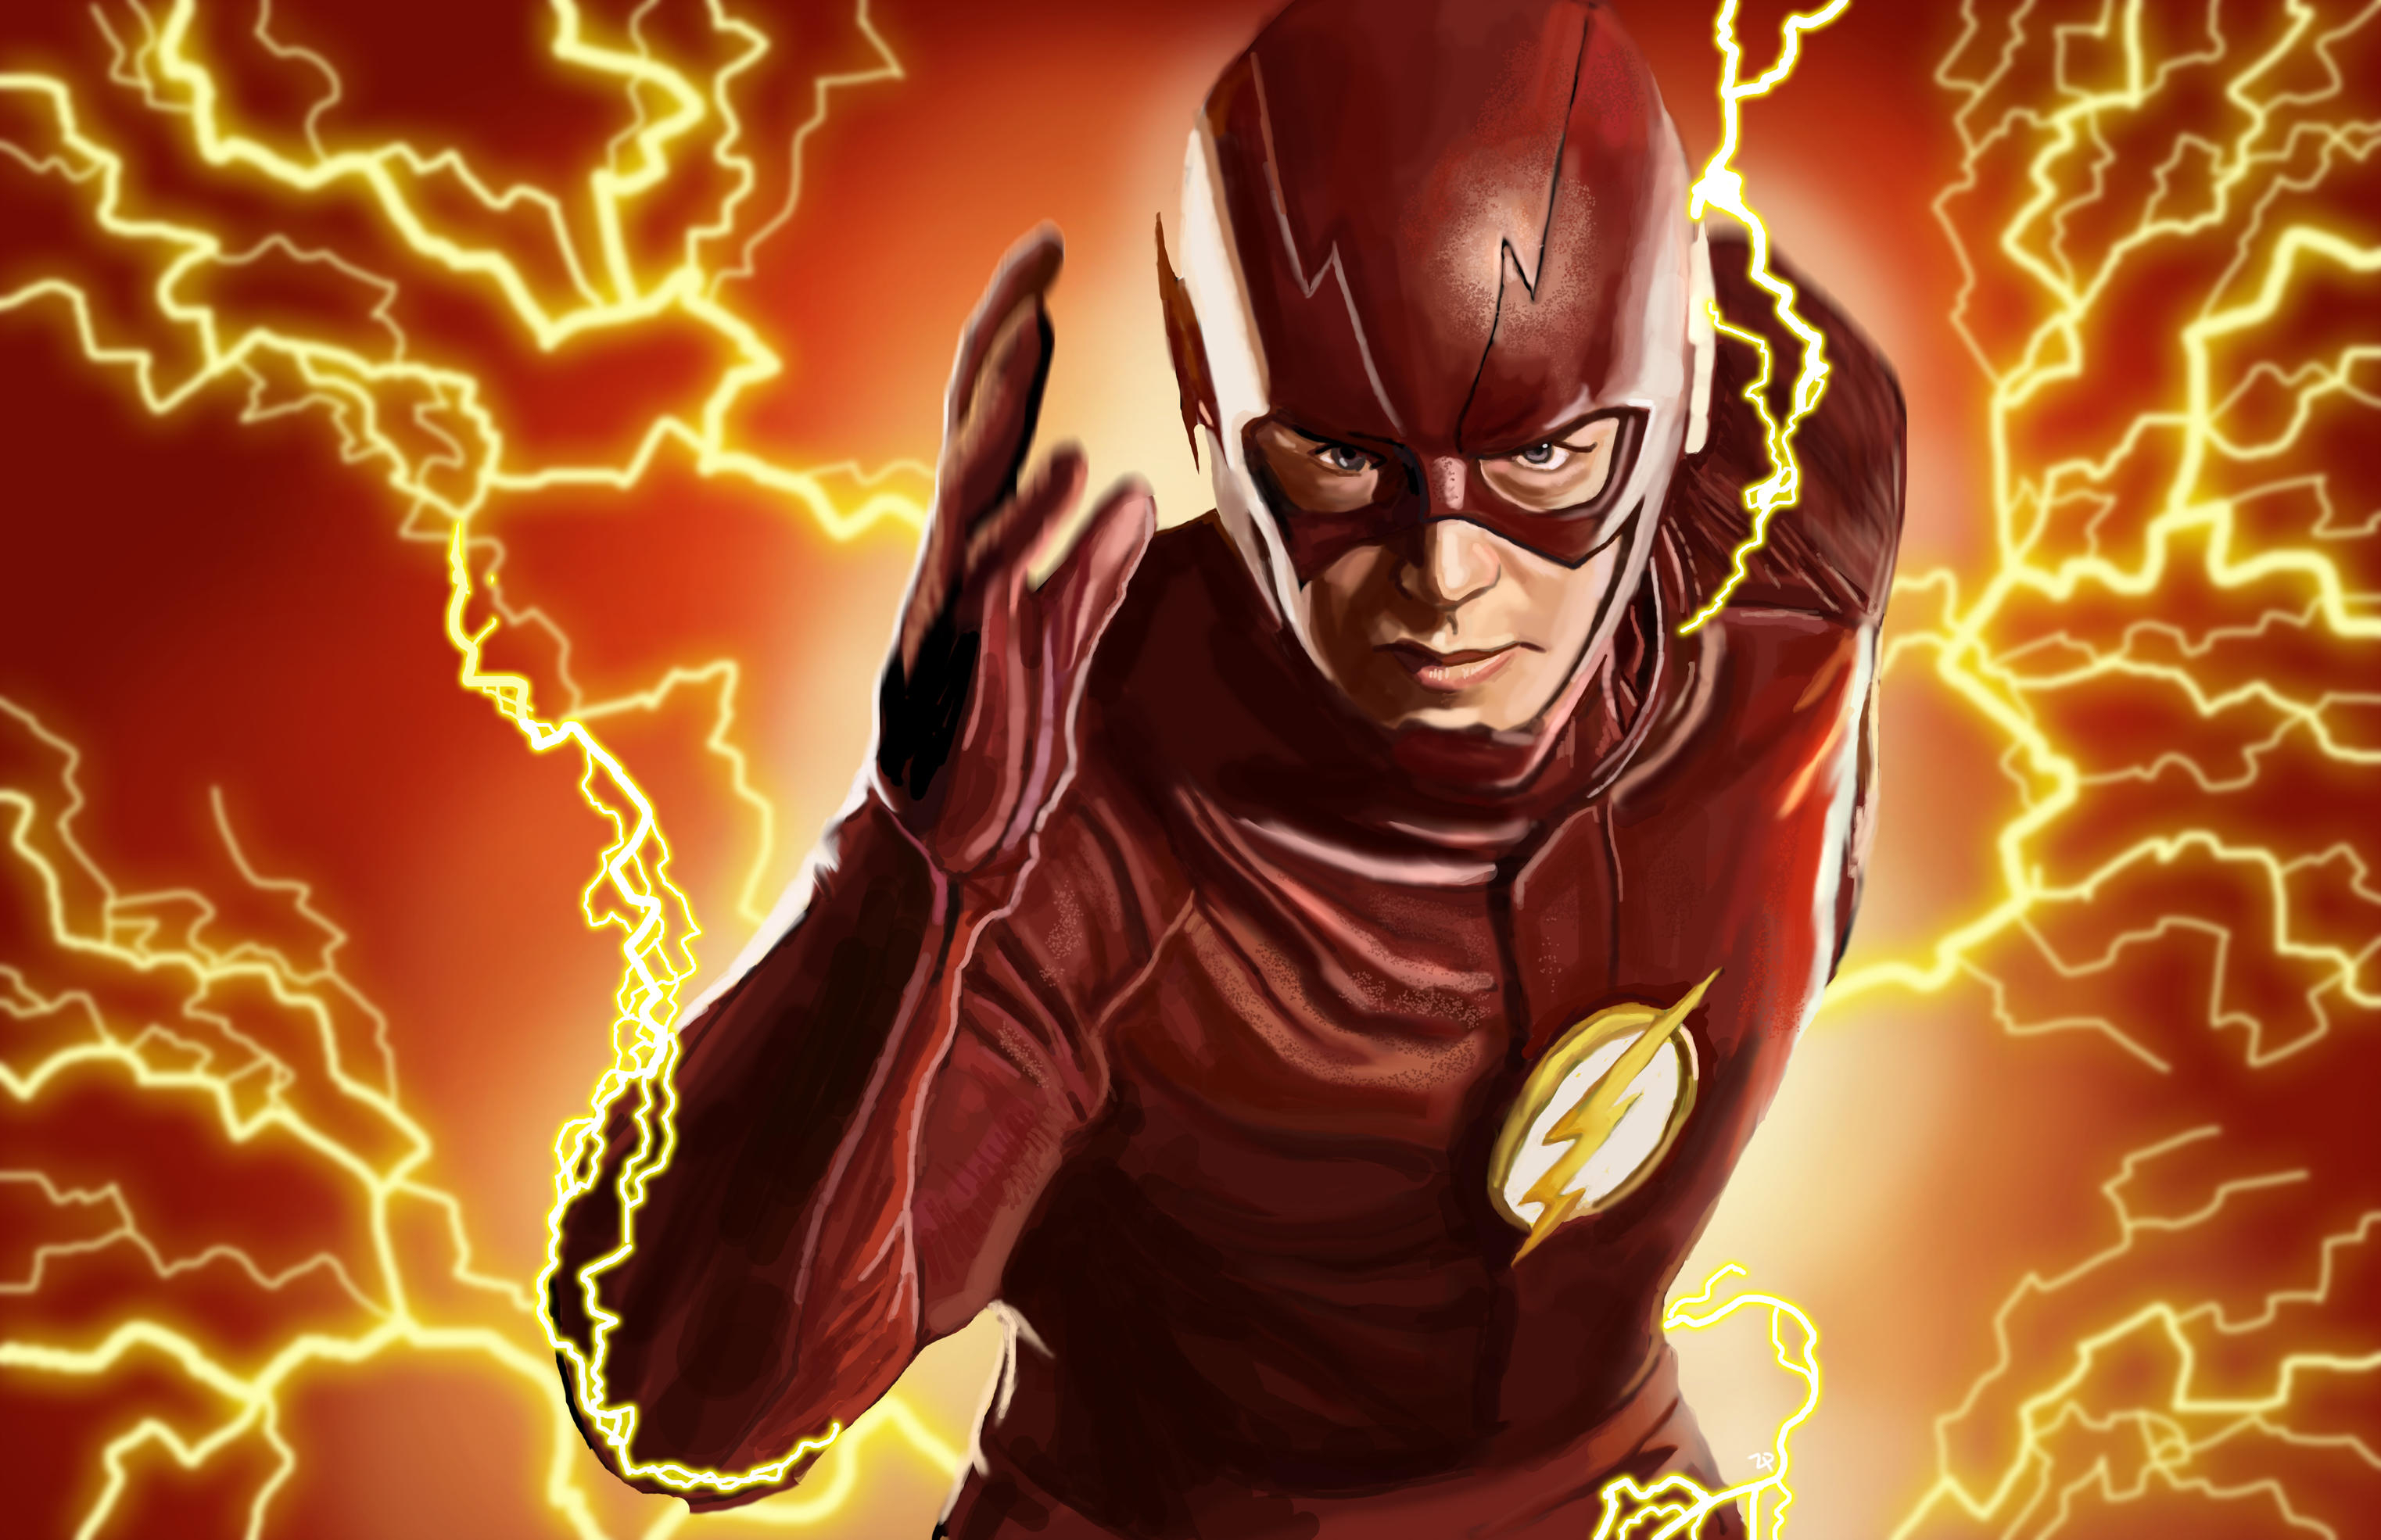 Flash Wallpaper / The Flash 4k, HD Tv Shows, 4k Wallpapers, Images